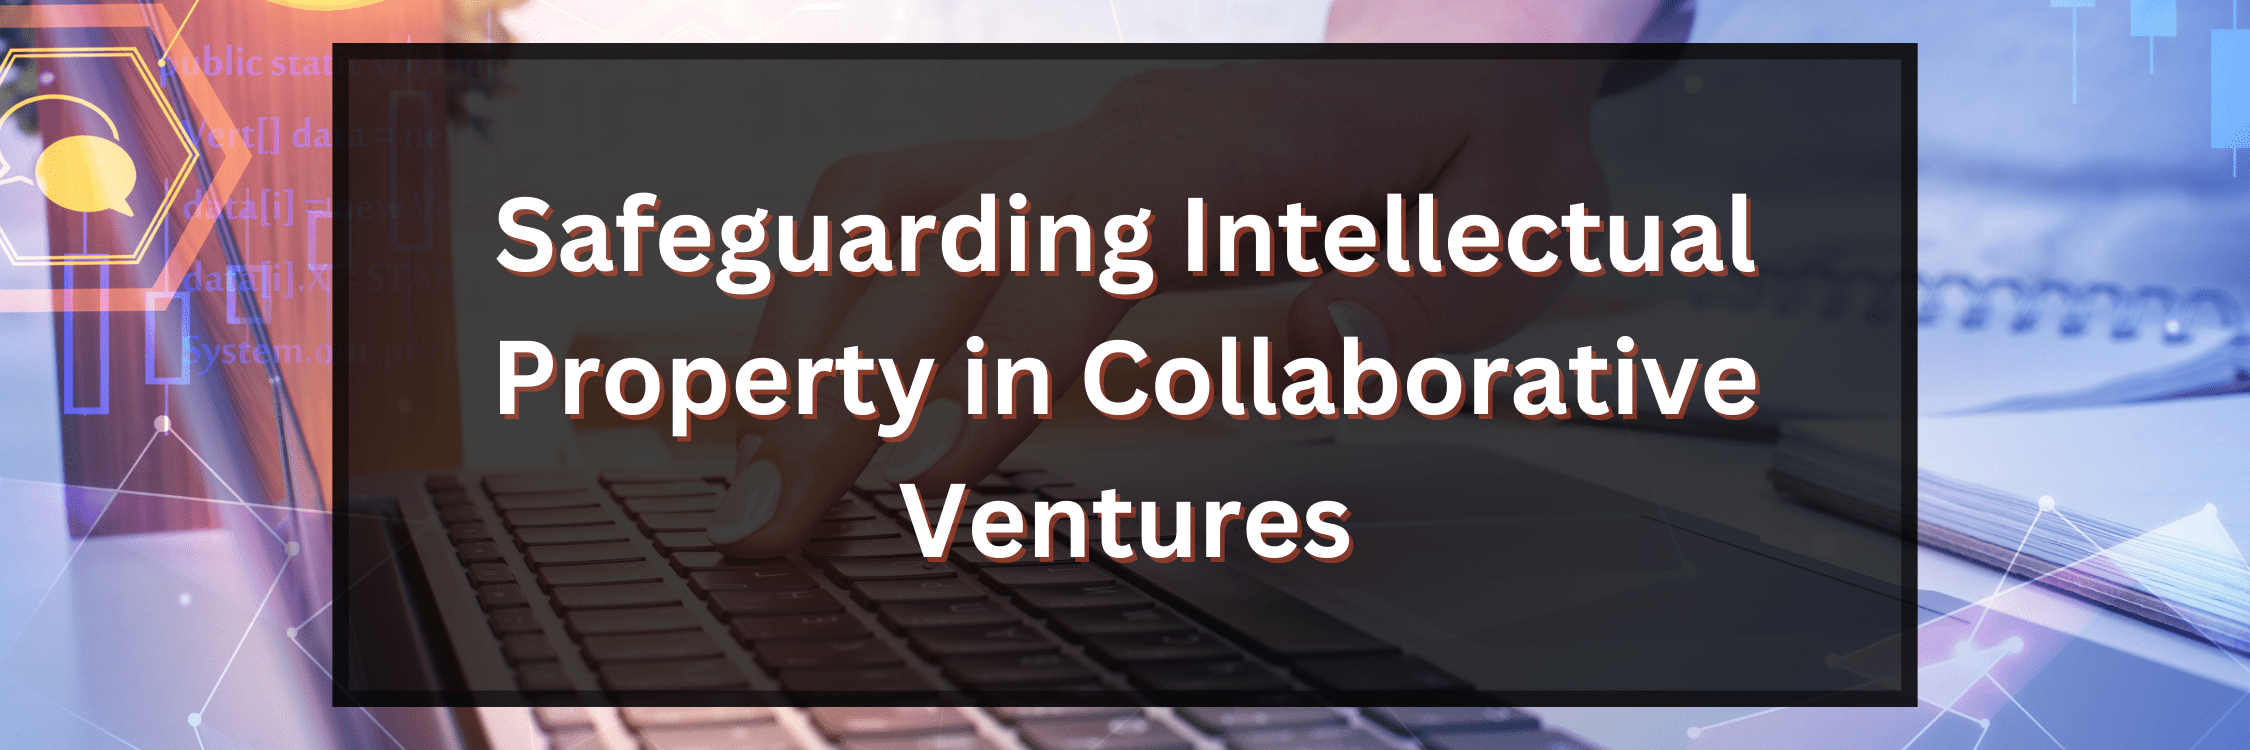 Safeguarding Intellectual Property In Collaborative Ventures